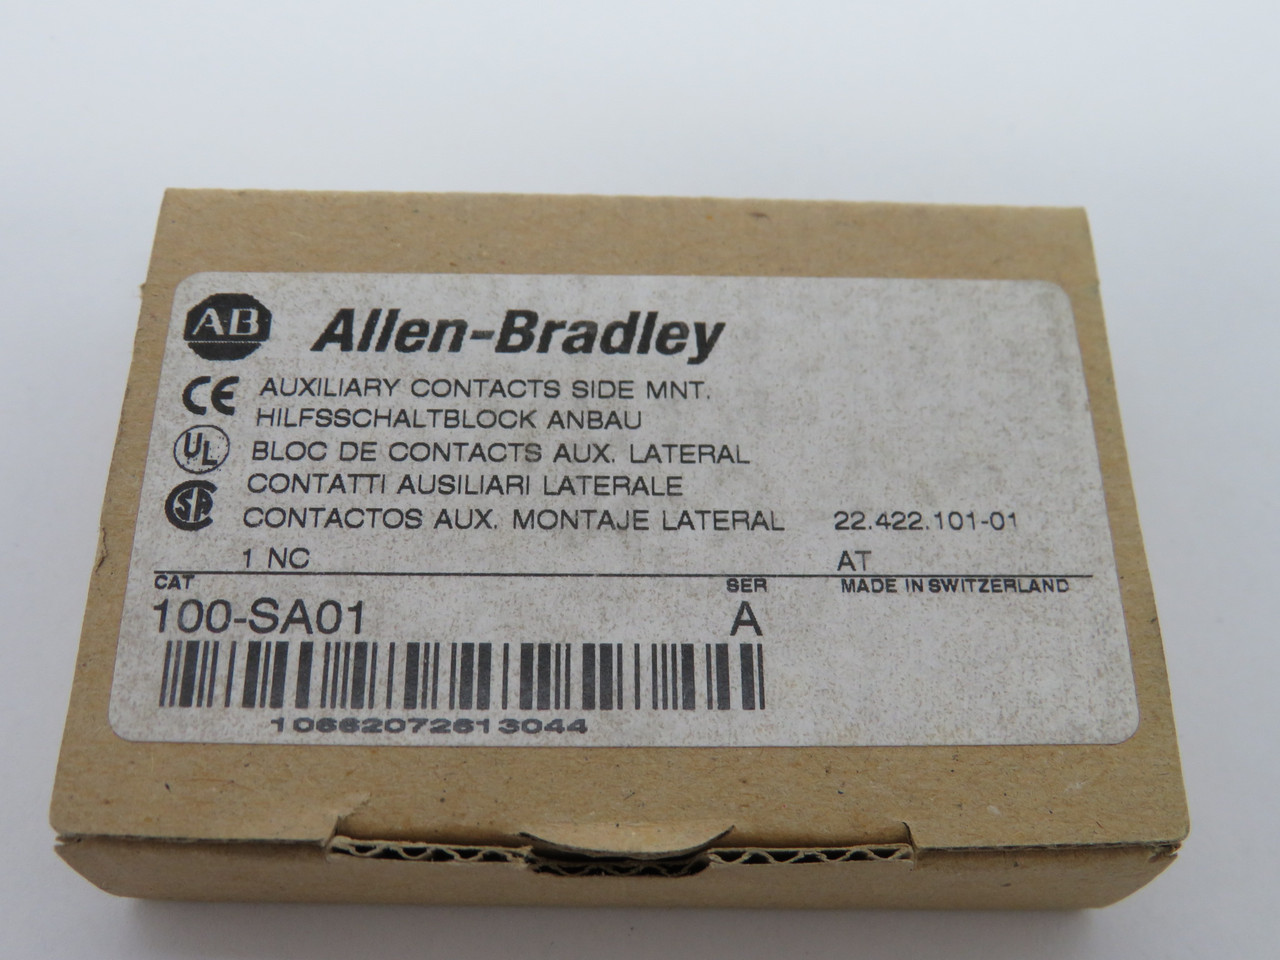 Allen-Bradley 100-SA01 Series A Auxiliary Contact Block 1NC 690V ! NEW !